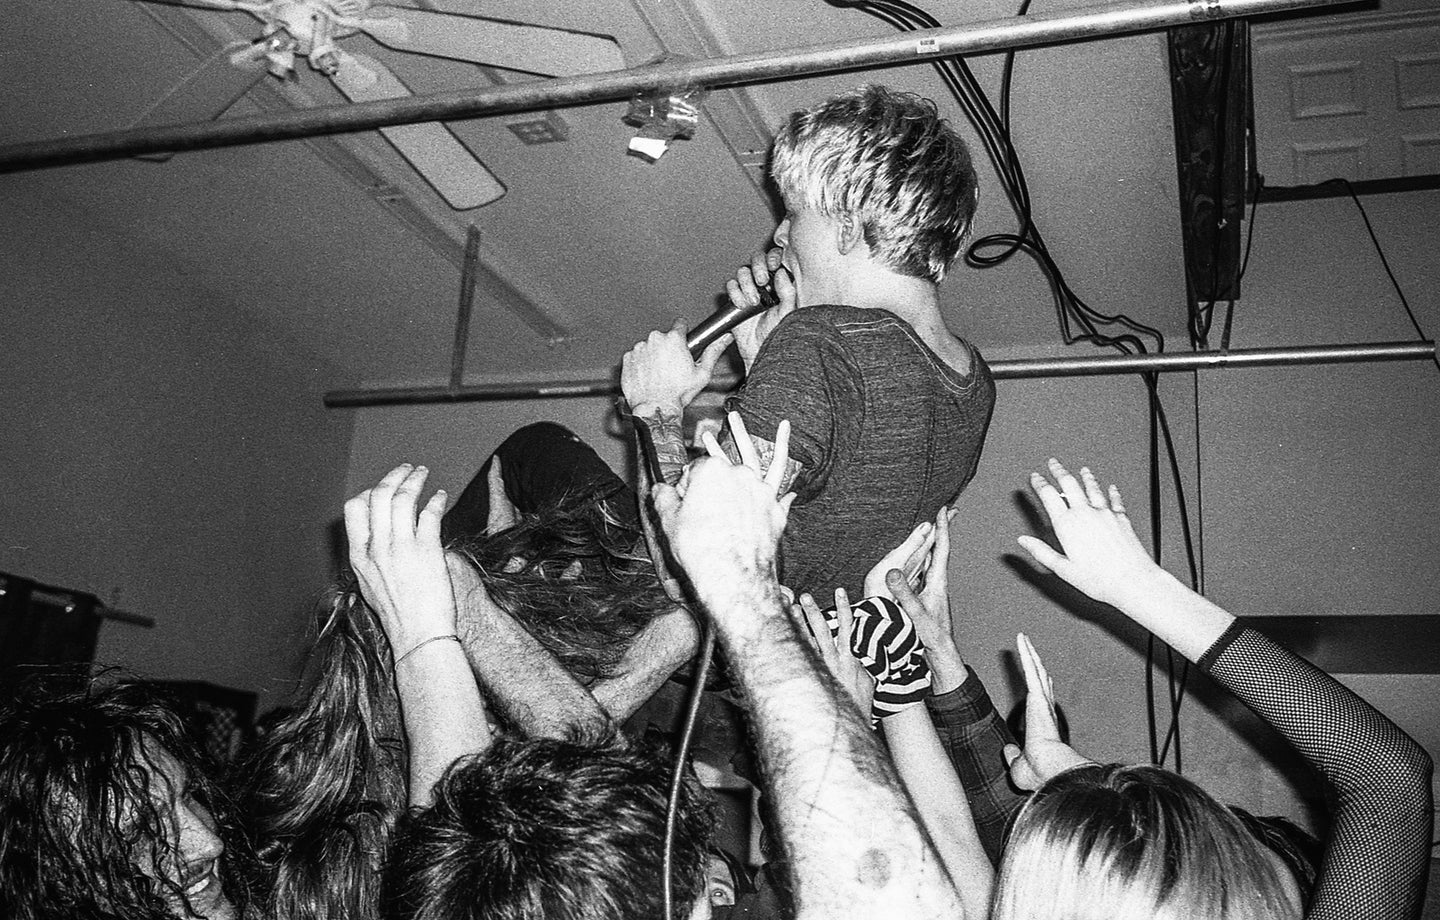 A crowd surfing musician, shot on Ilford HP5 Plus.